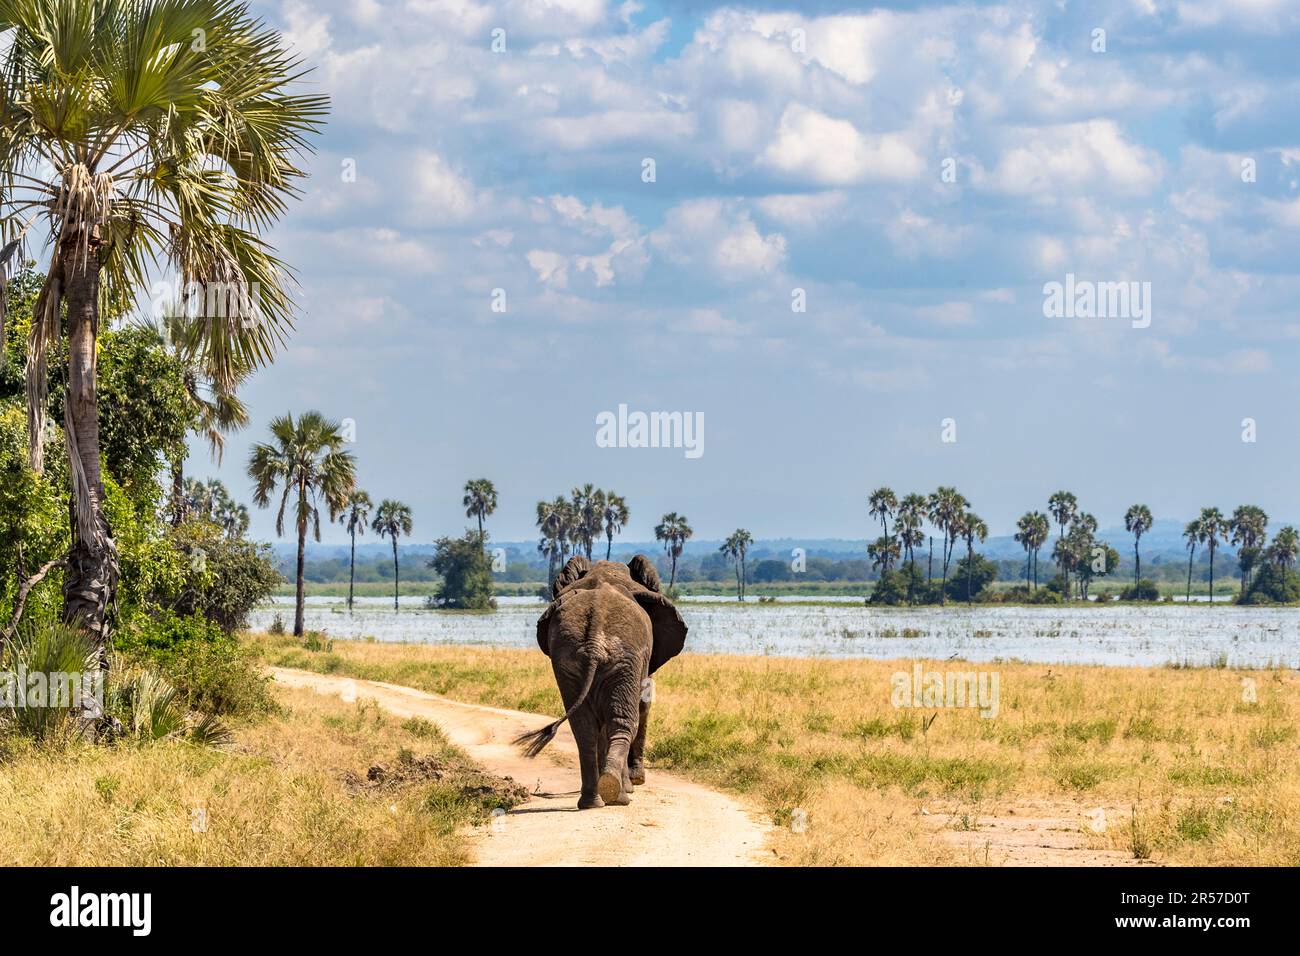 Elephants love to march on the roads in the national park. Here they make good progress in search of food. Elephants at Shire River of Malawi's Liwonde National Park Stock Photo